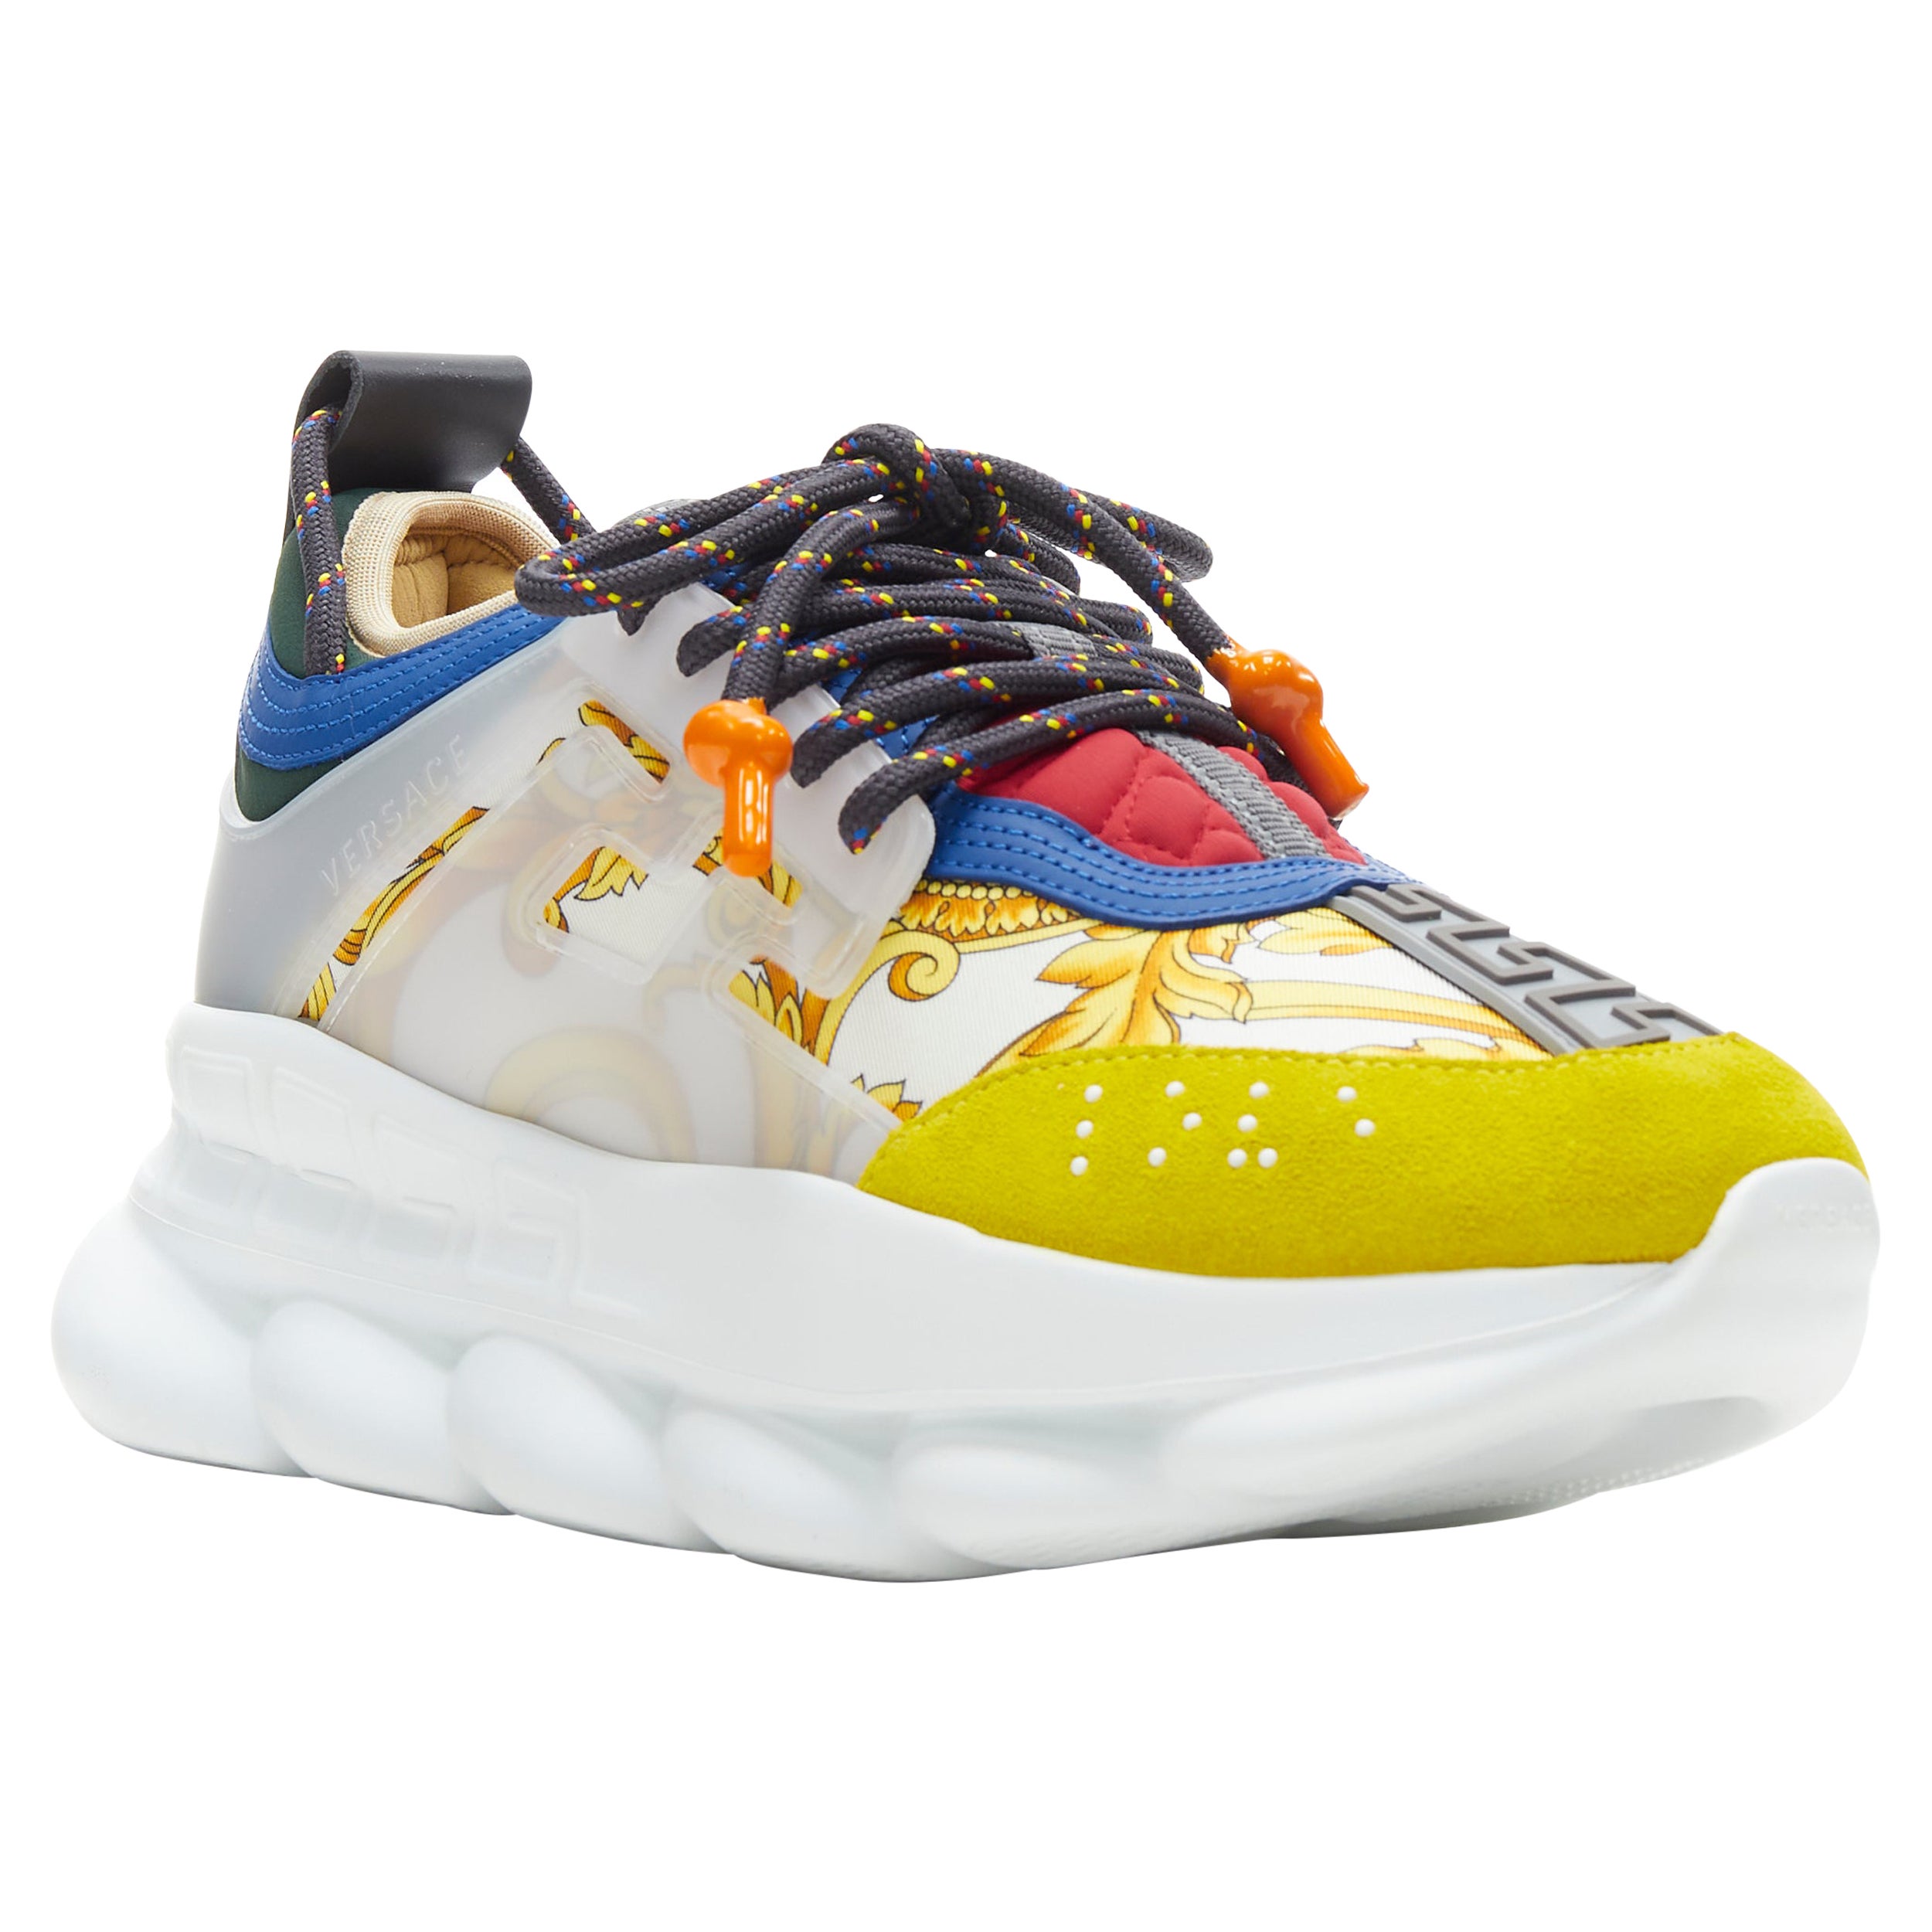 Versace White Chain Reaction Sneakers EU 42/US 9 $995. Pre-Owned. Box  Included. | Sneakers, Wedding sneaker, White sneaker